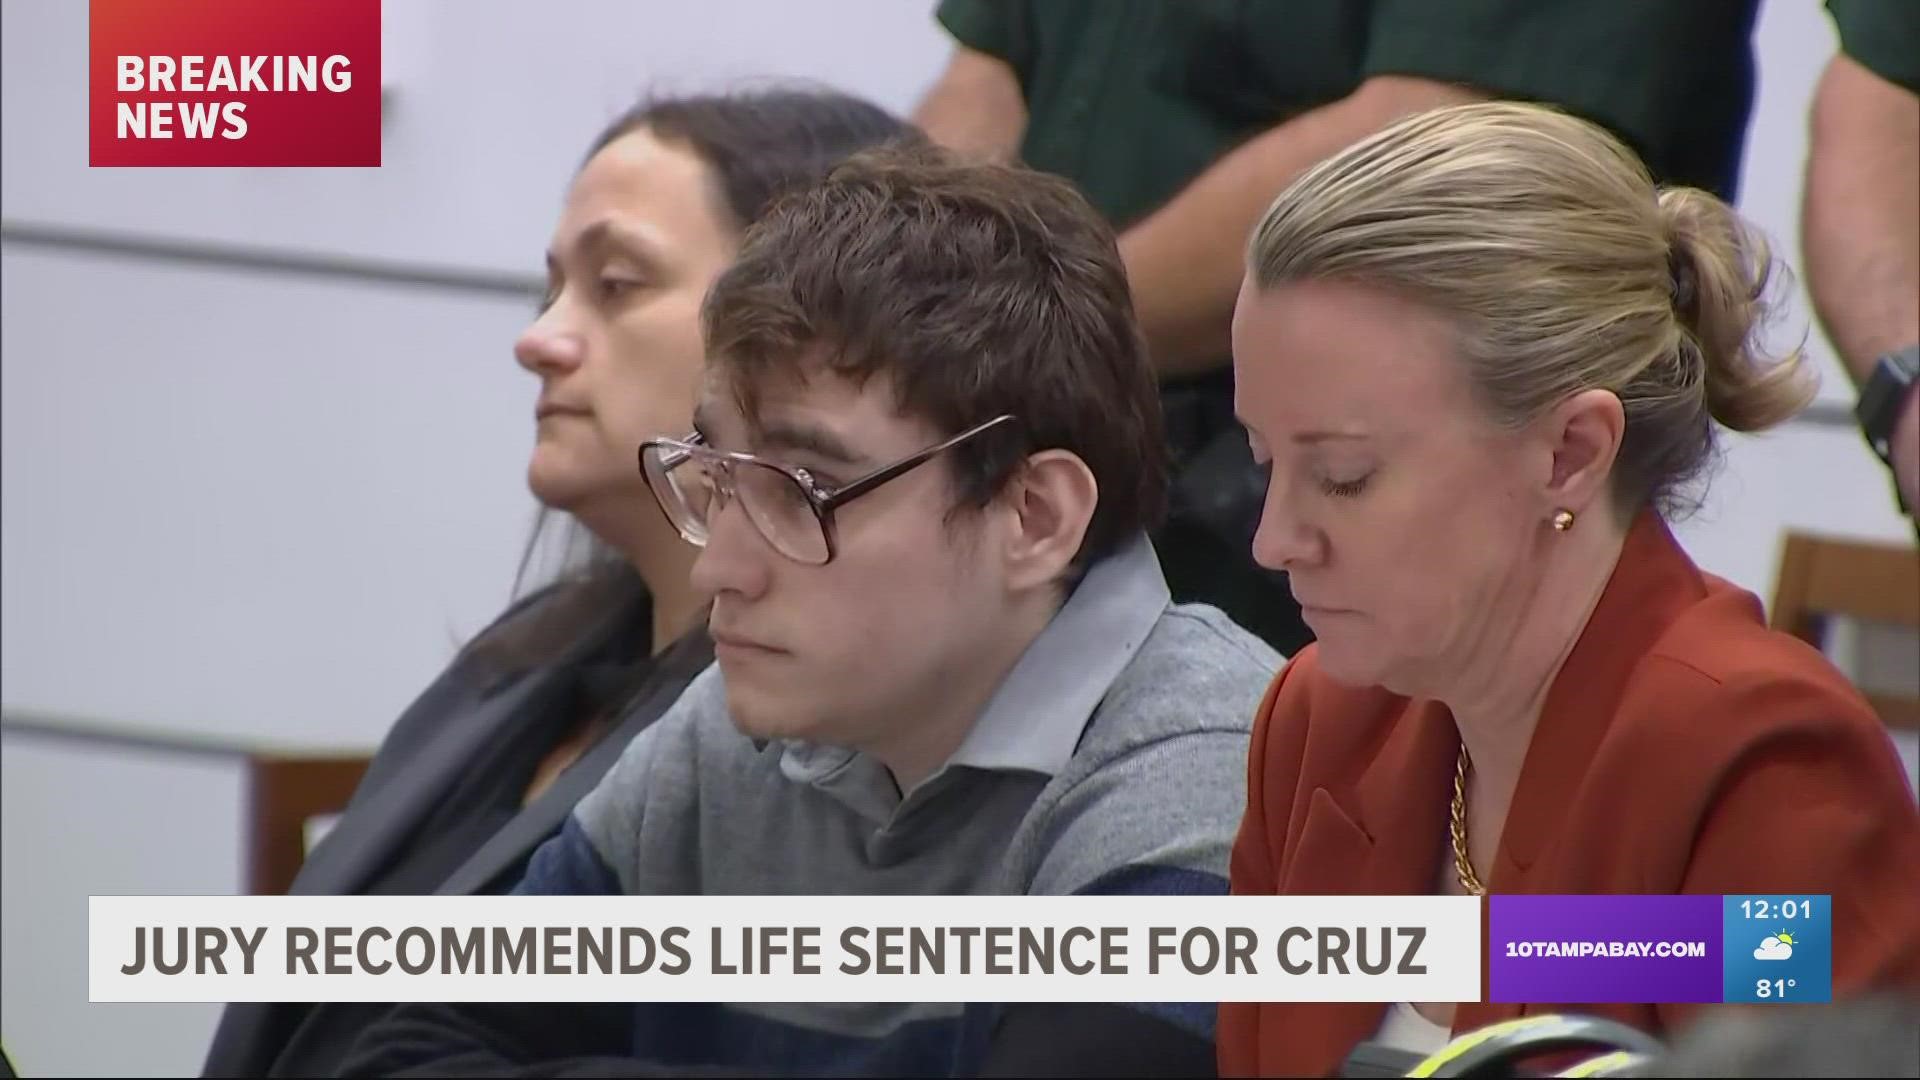 School shooter Nikolas Cruz will be sentenced to life without parole for the 2018 murder of 17 people at Parkland’s Marjory Stoneman Douglas High School.